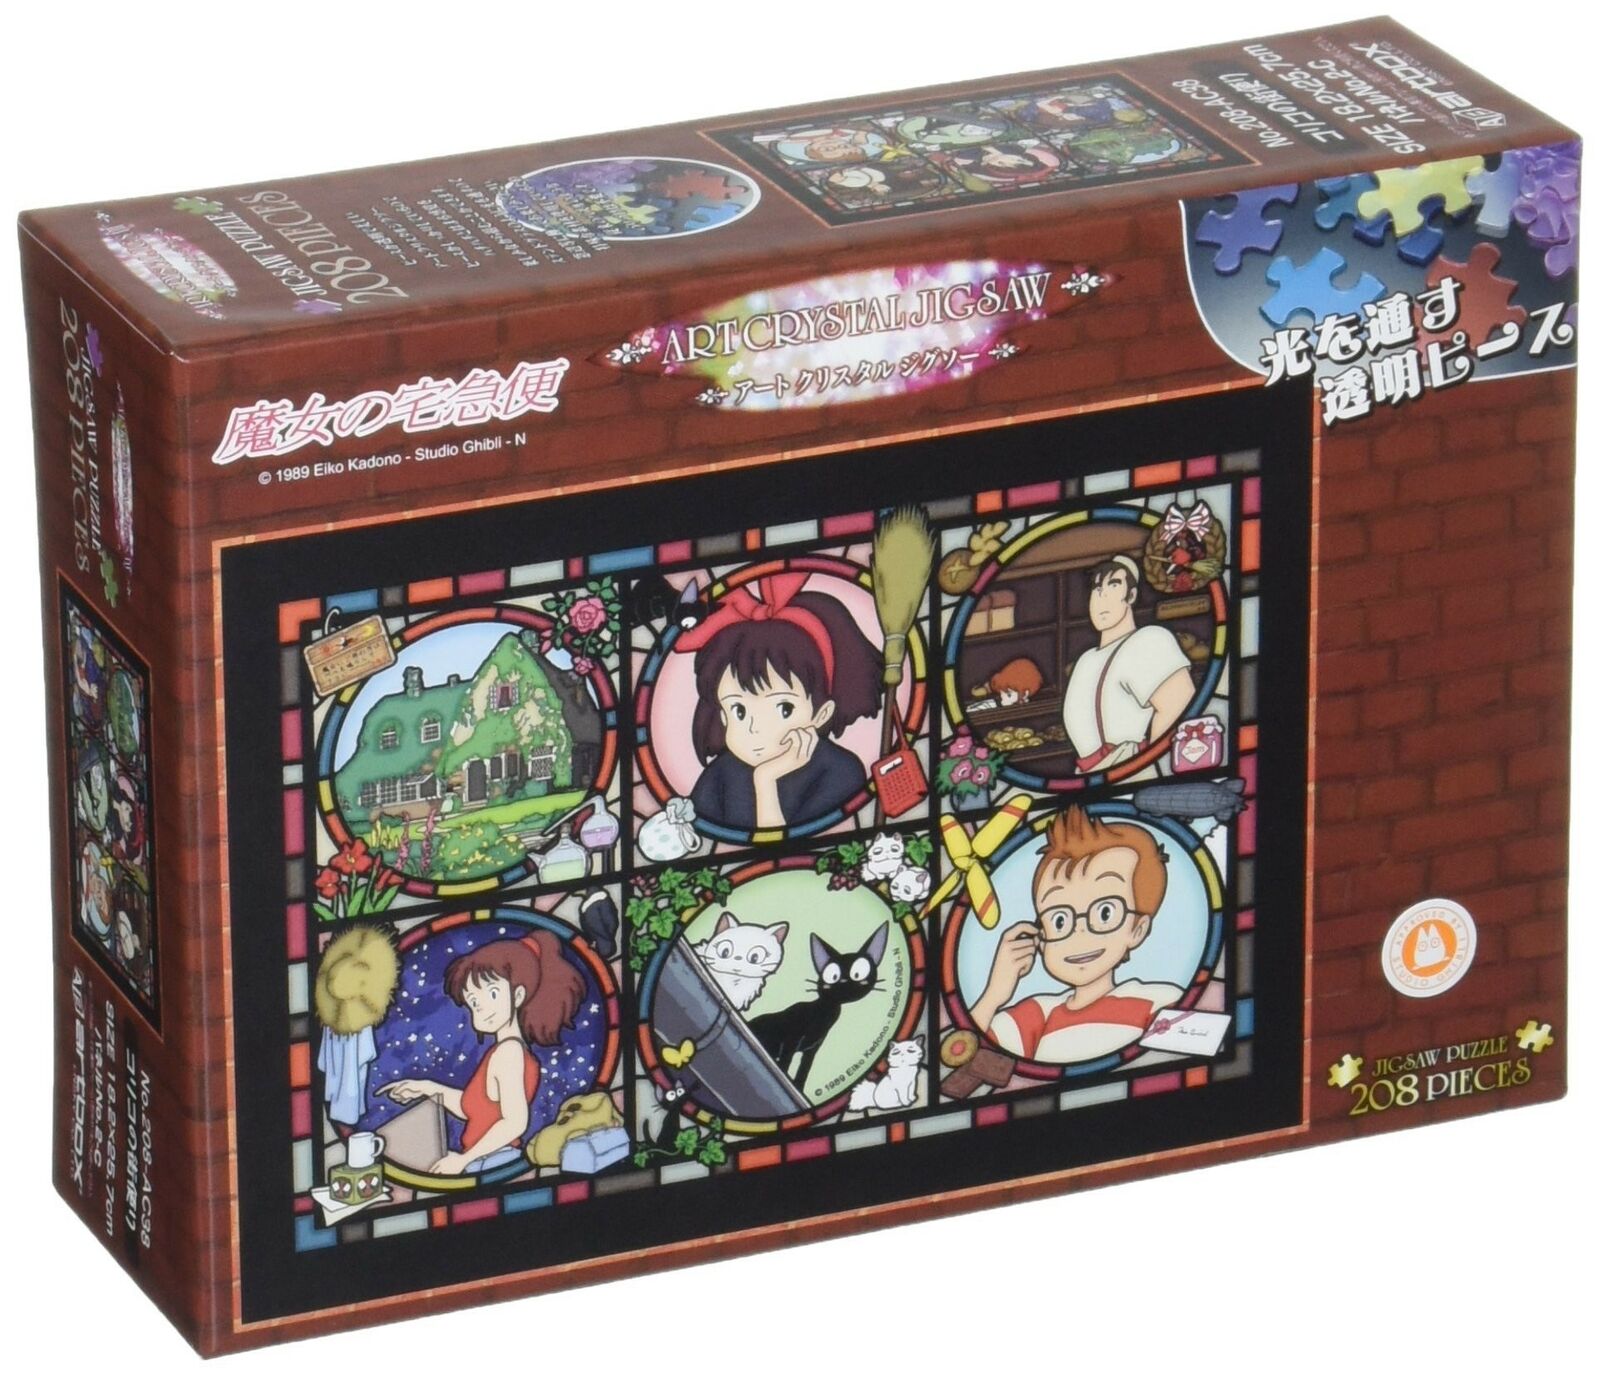 ensky Kiki's Delivery Service The Town of Koriko Art Crystal Jigsaw Puzzle 